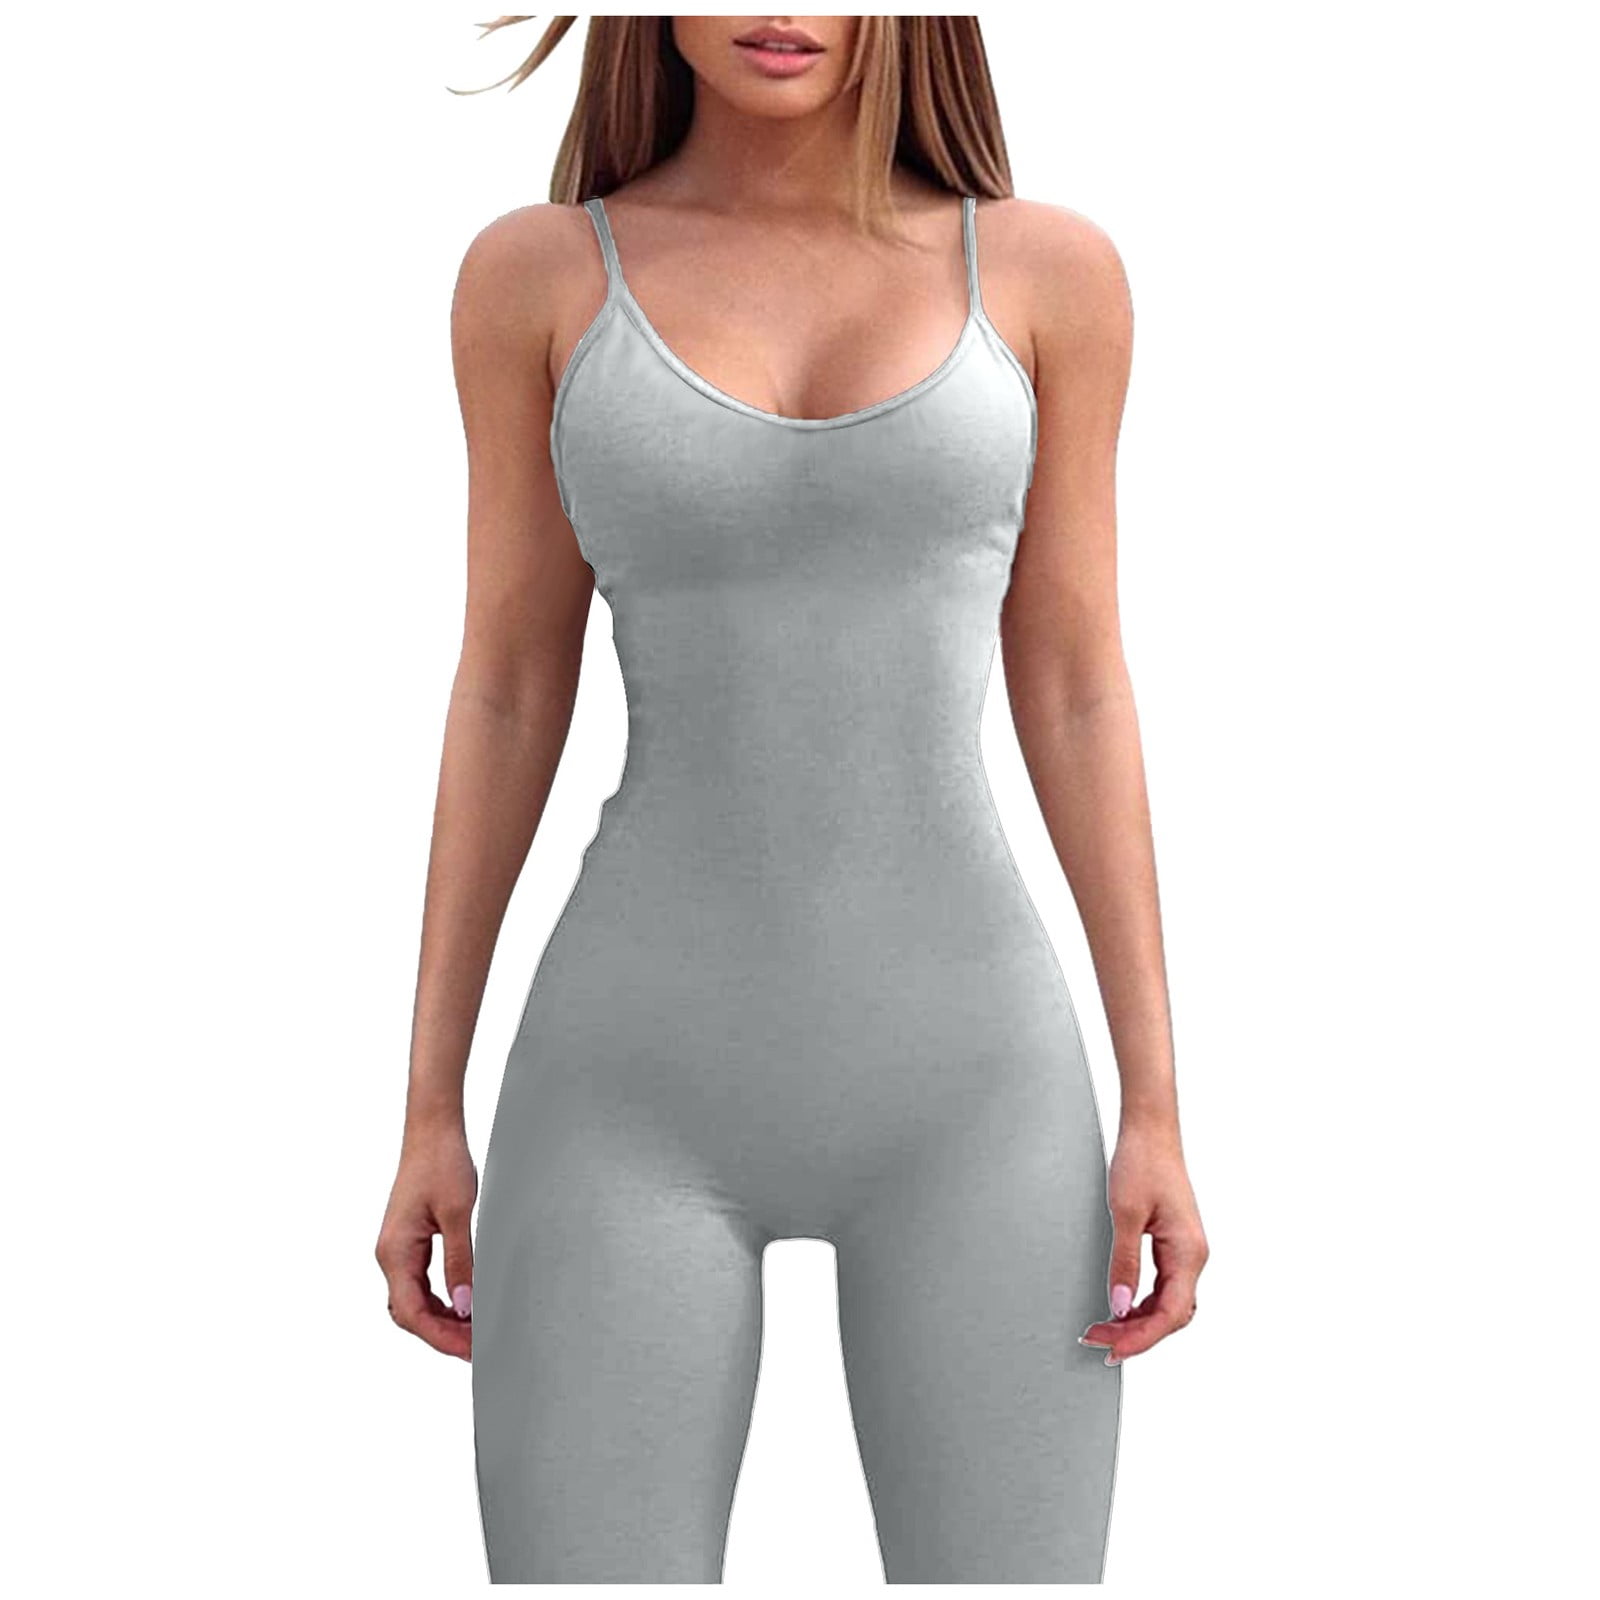 Bodysuit For Women Tummy Control Seamless Spaghetti Strap Leisure Yoga  Workout Gym Leggings Padded Bra Jumpsuits For Women Casual Summer Grey L